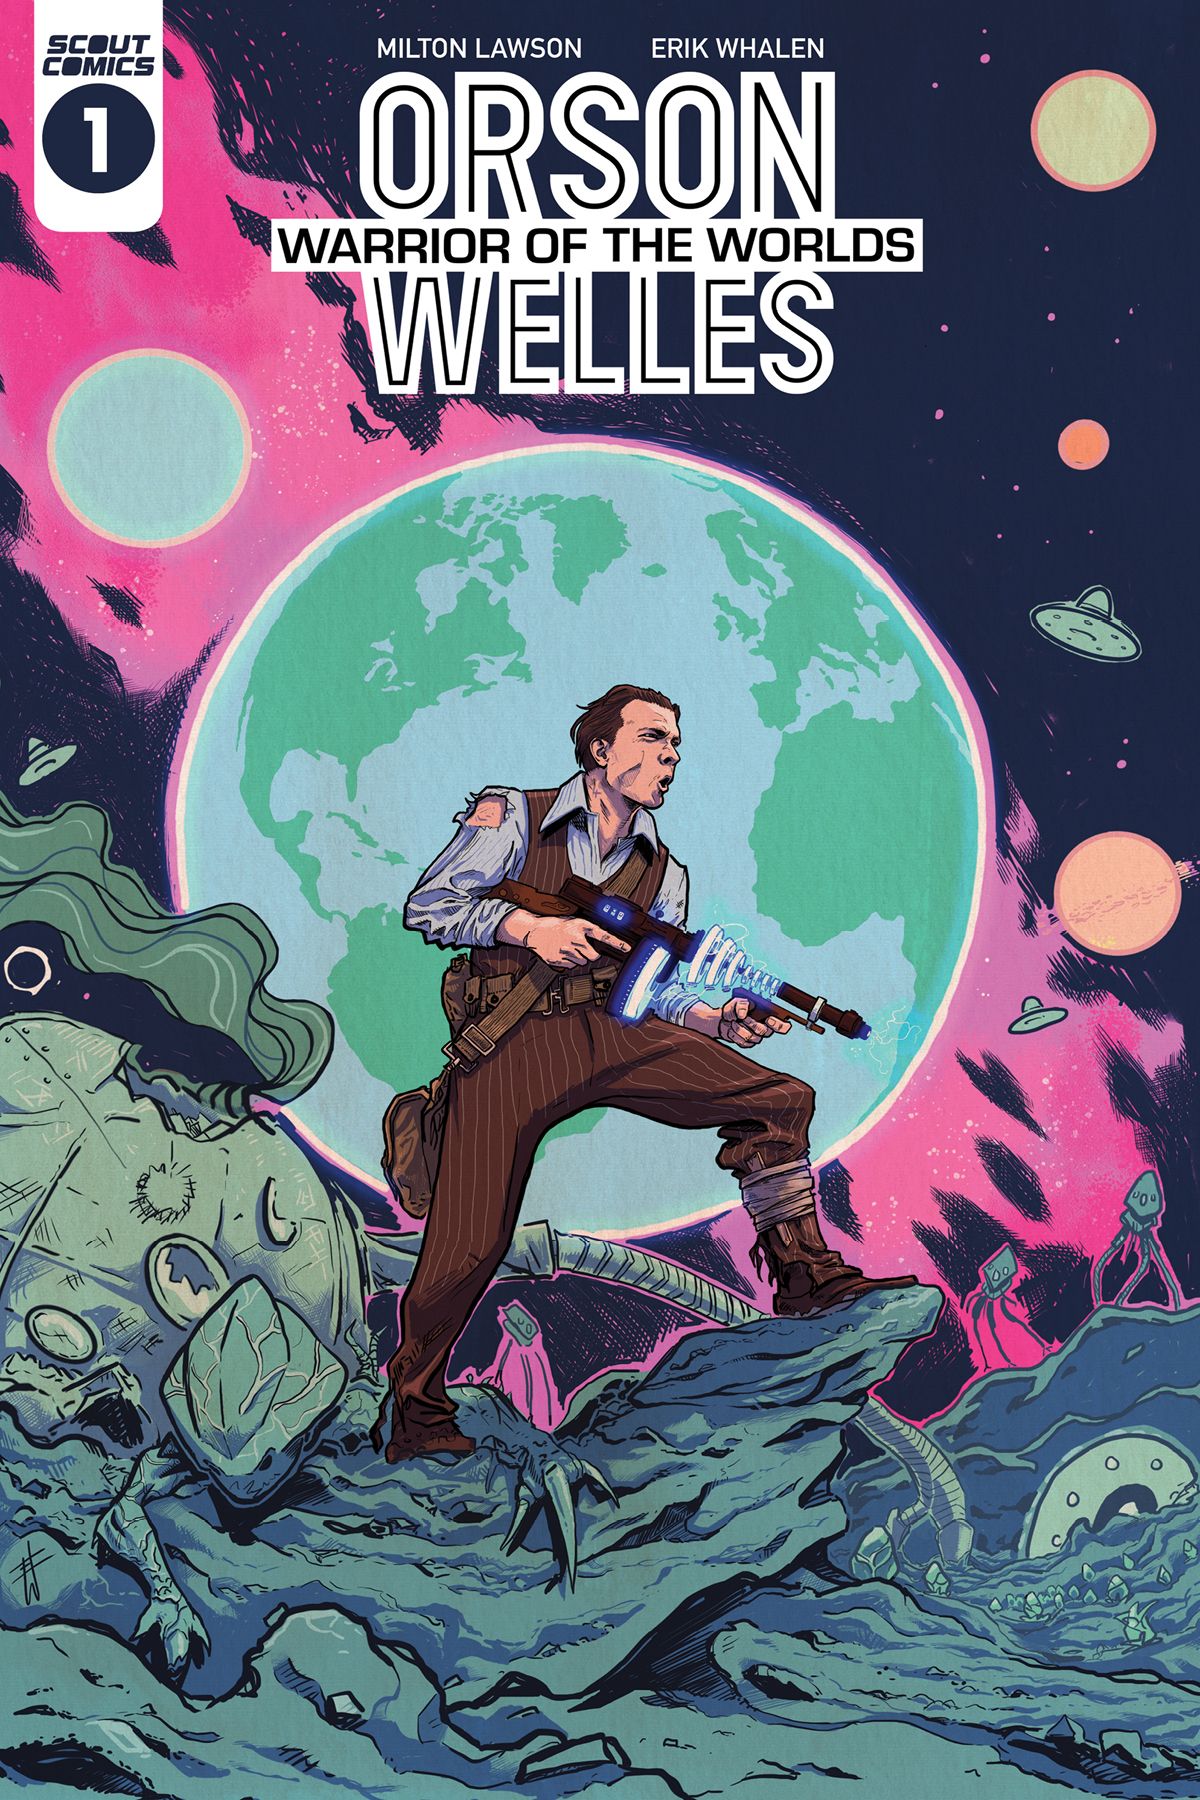 Orson Welles: Warrior of the Worlds #1 Comic